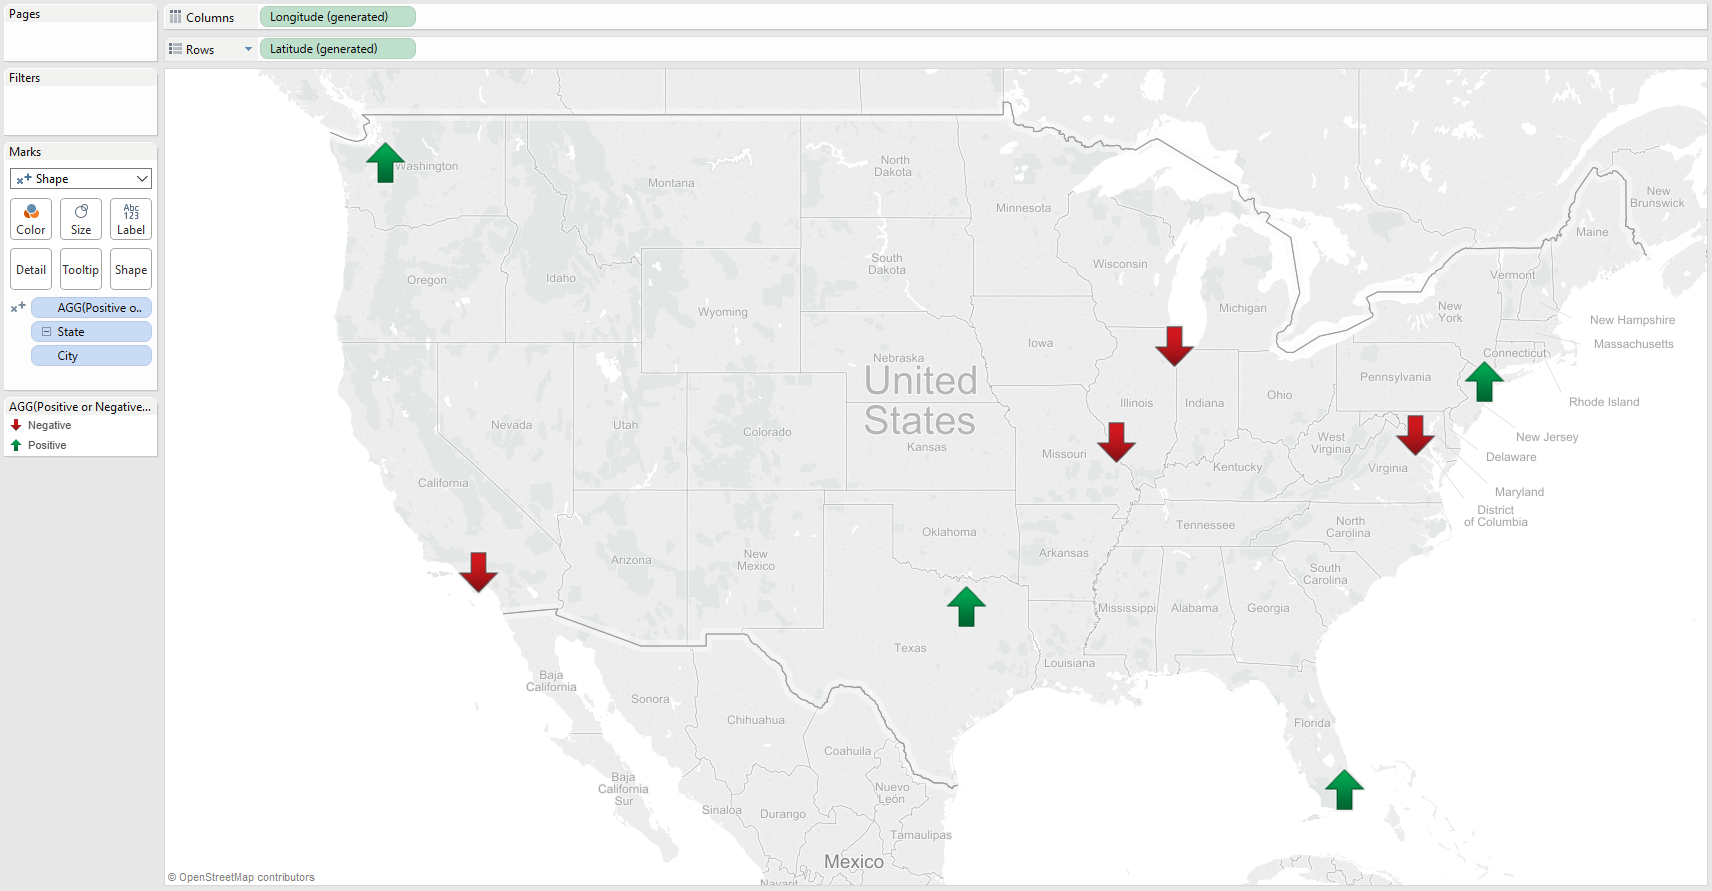 Tableau's intuitive shapes in action!